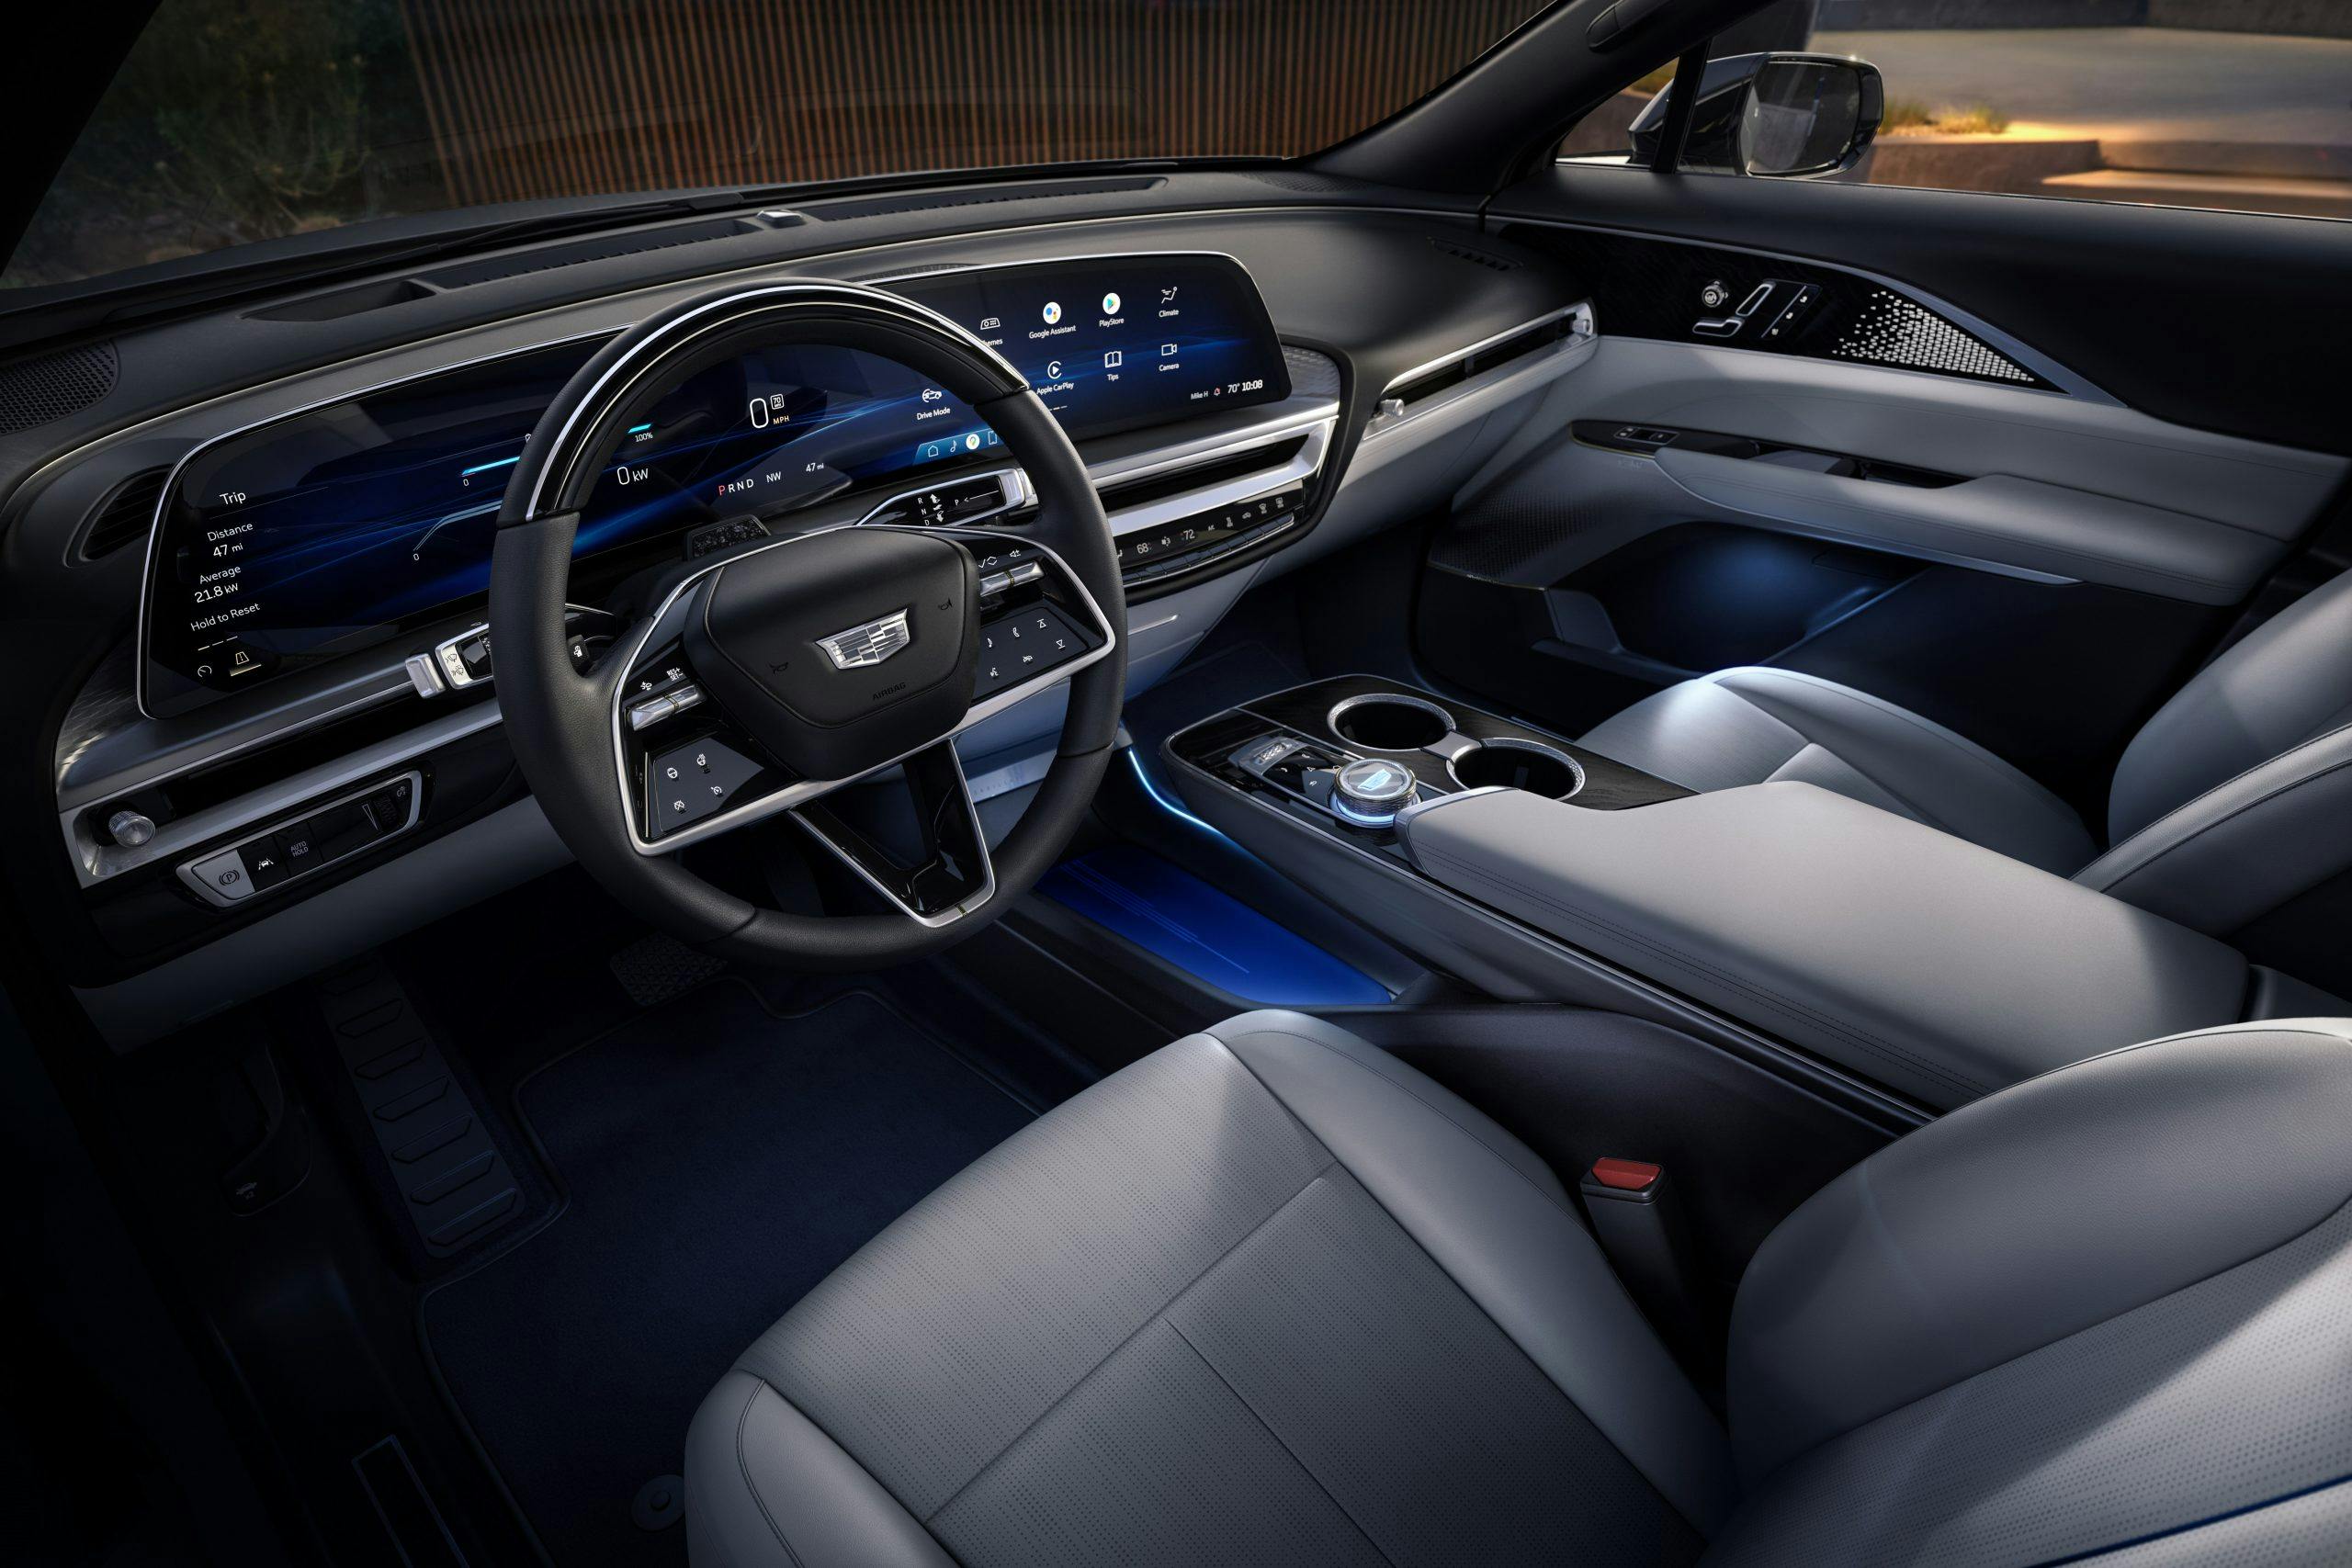 The LYRIQ interior is clean and simple with a focus on secondary